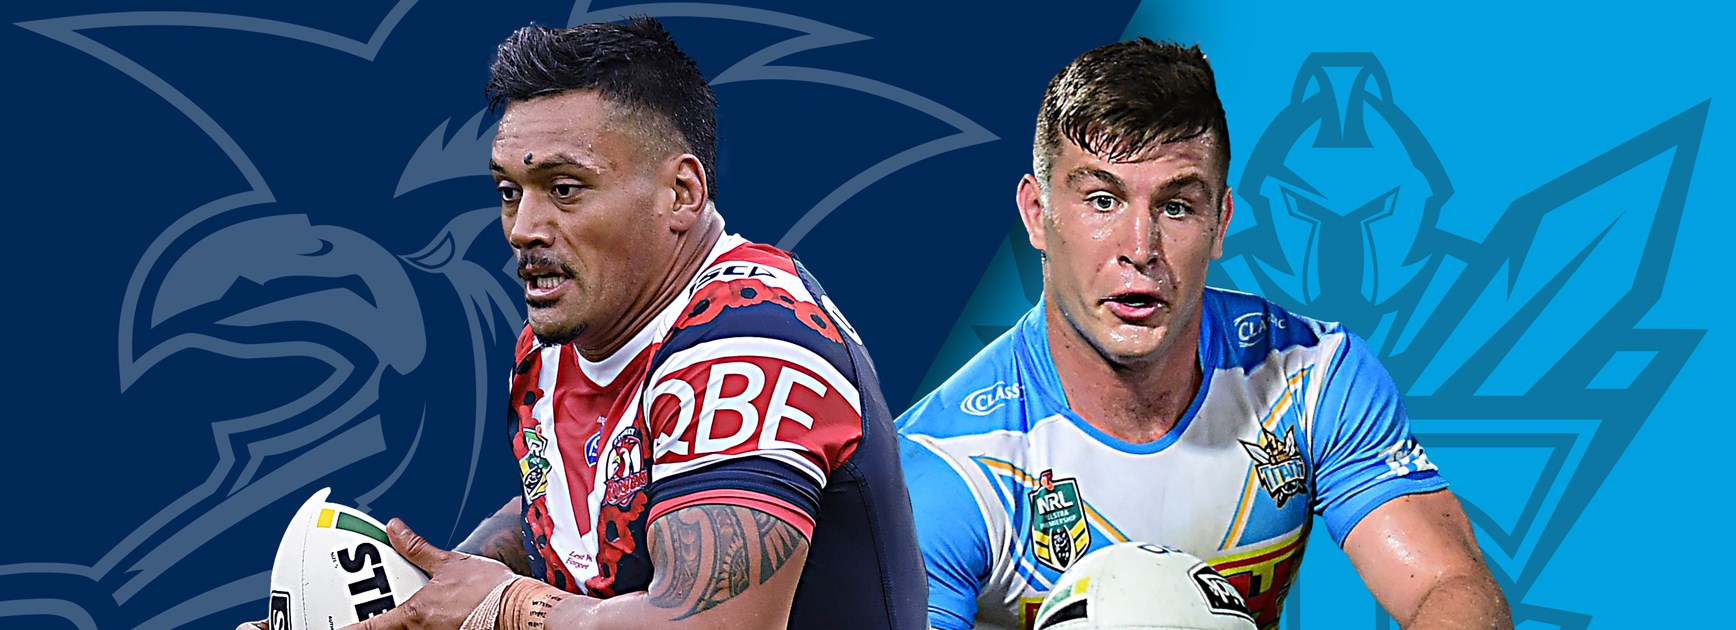 Roosters v Titans: Late changes for both sides